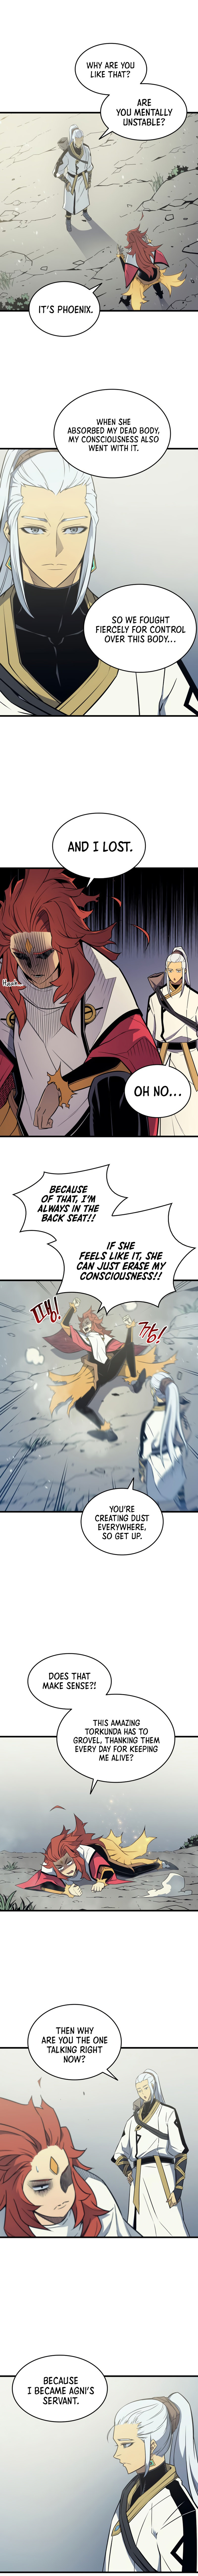 The Great Mage Returns After 4000 Years - Chapter 109 Page 3